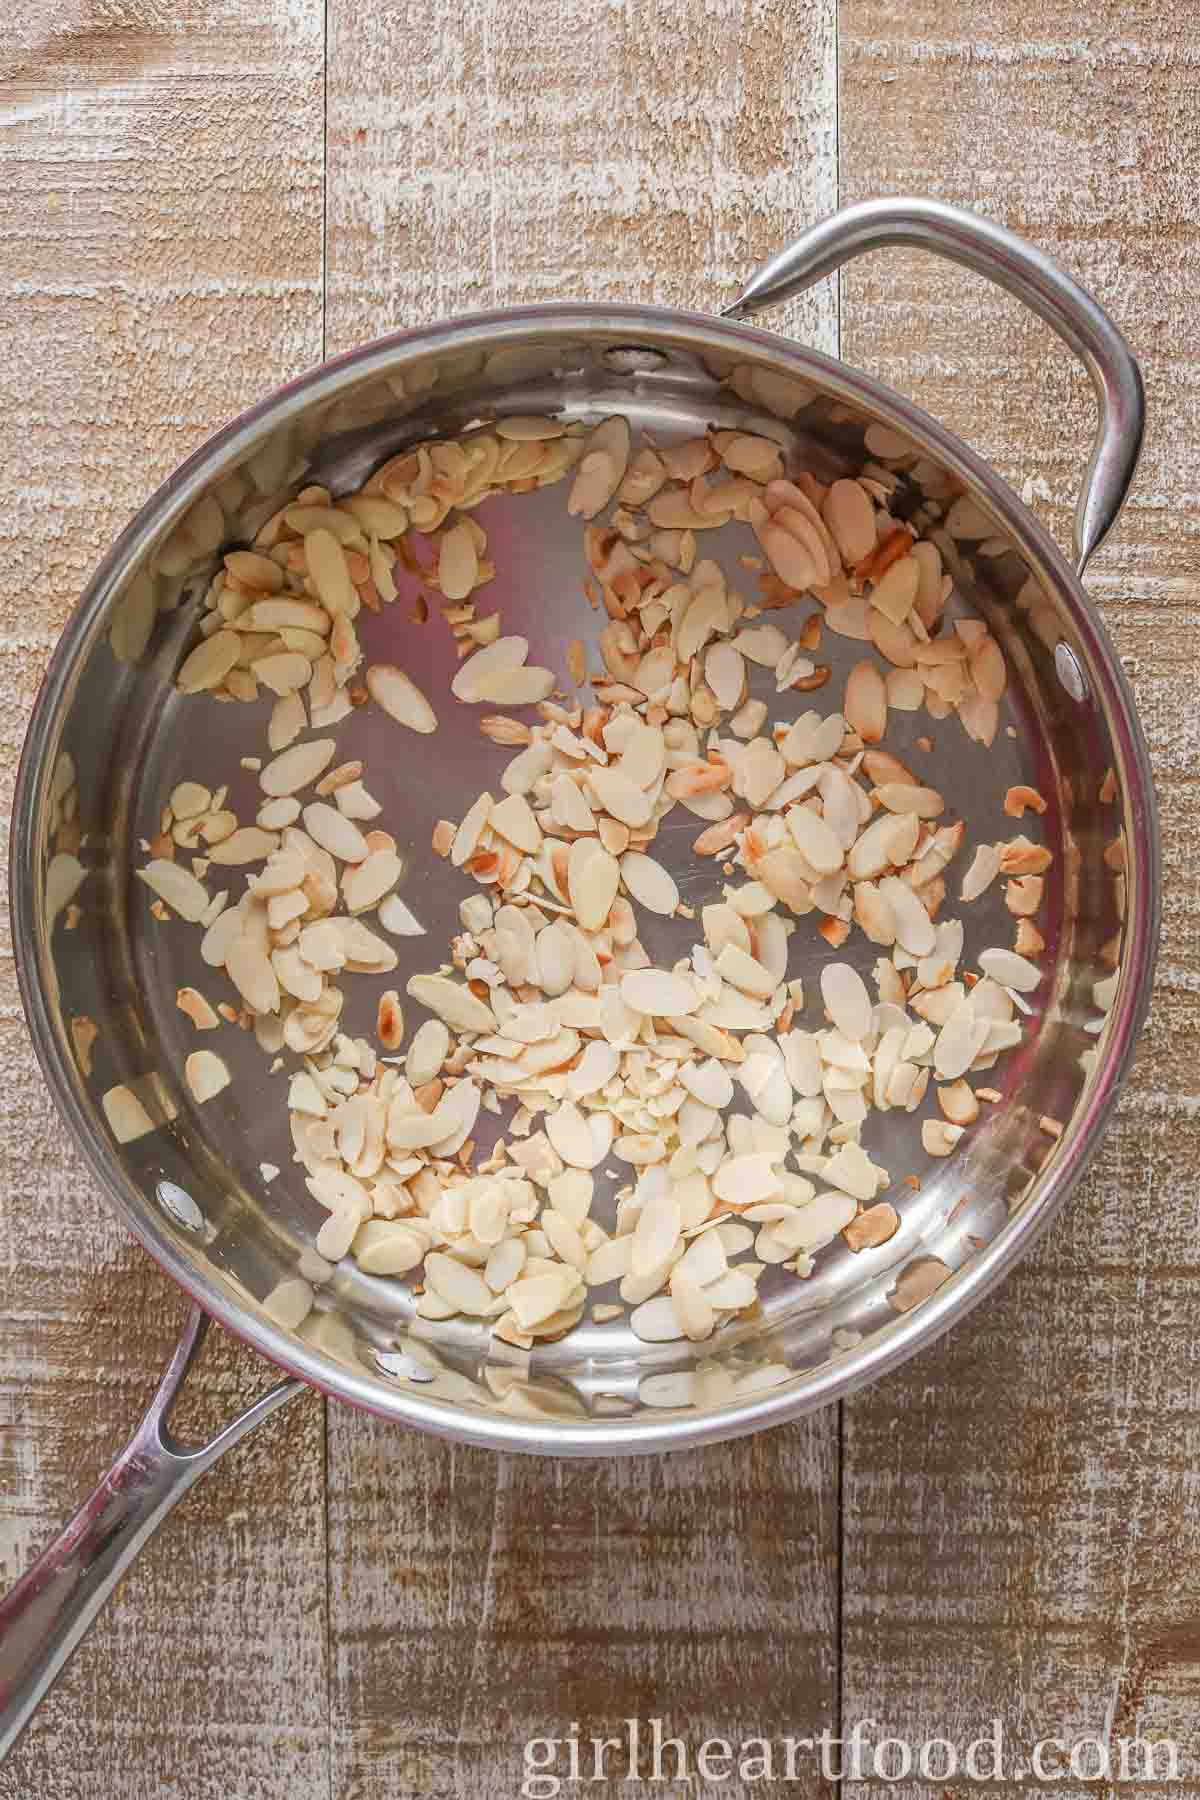 Sliced, toasted almonds in a stainless steel pan.